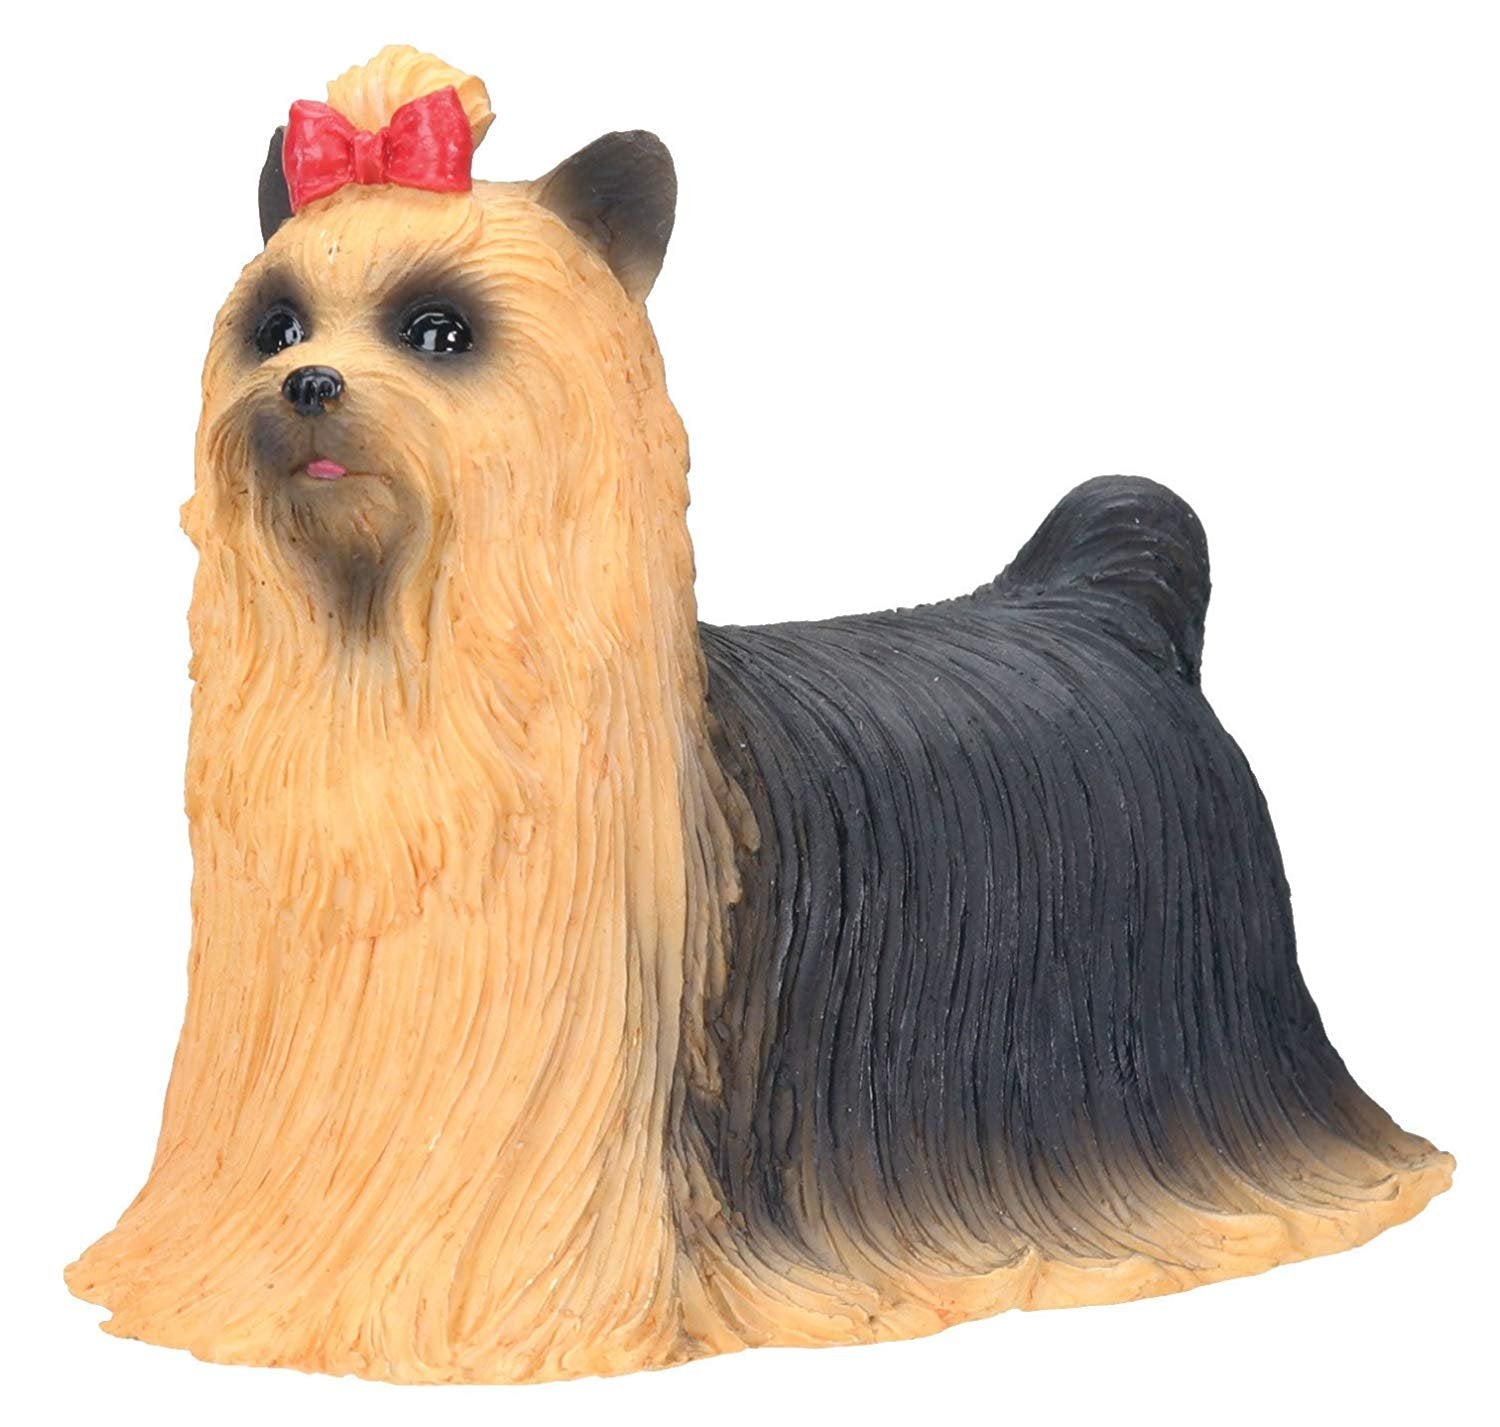 YTC Yorkshire Terrier Figurine, Hand Painted Cold Cast Resin